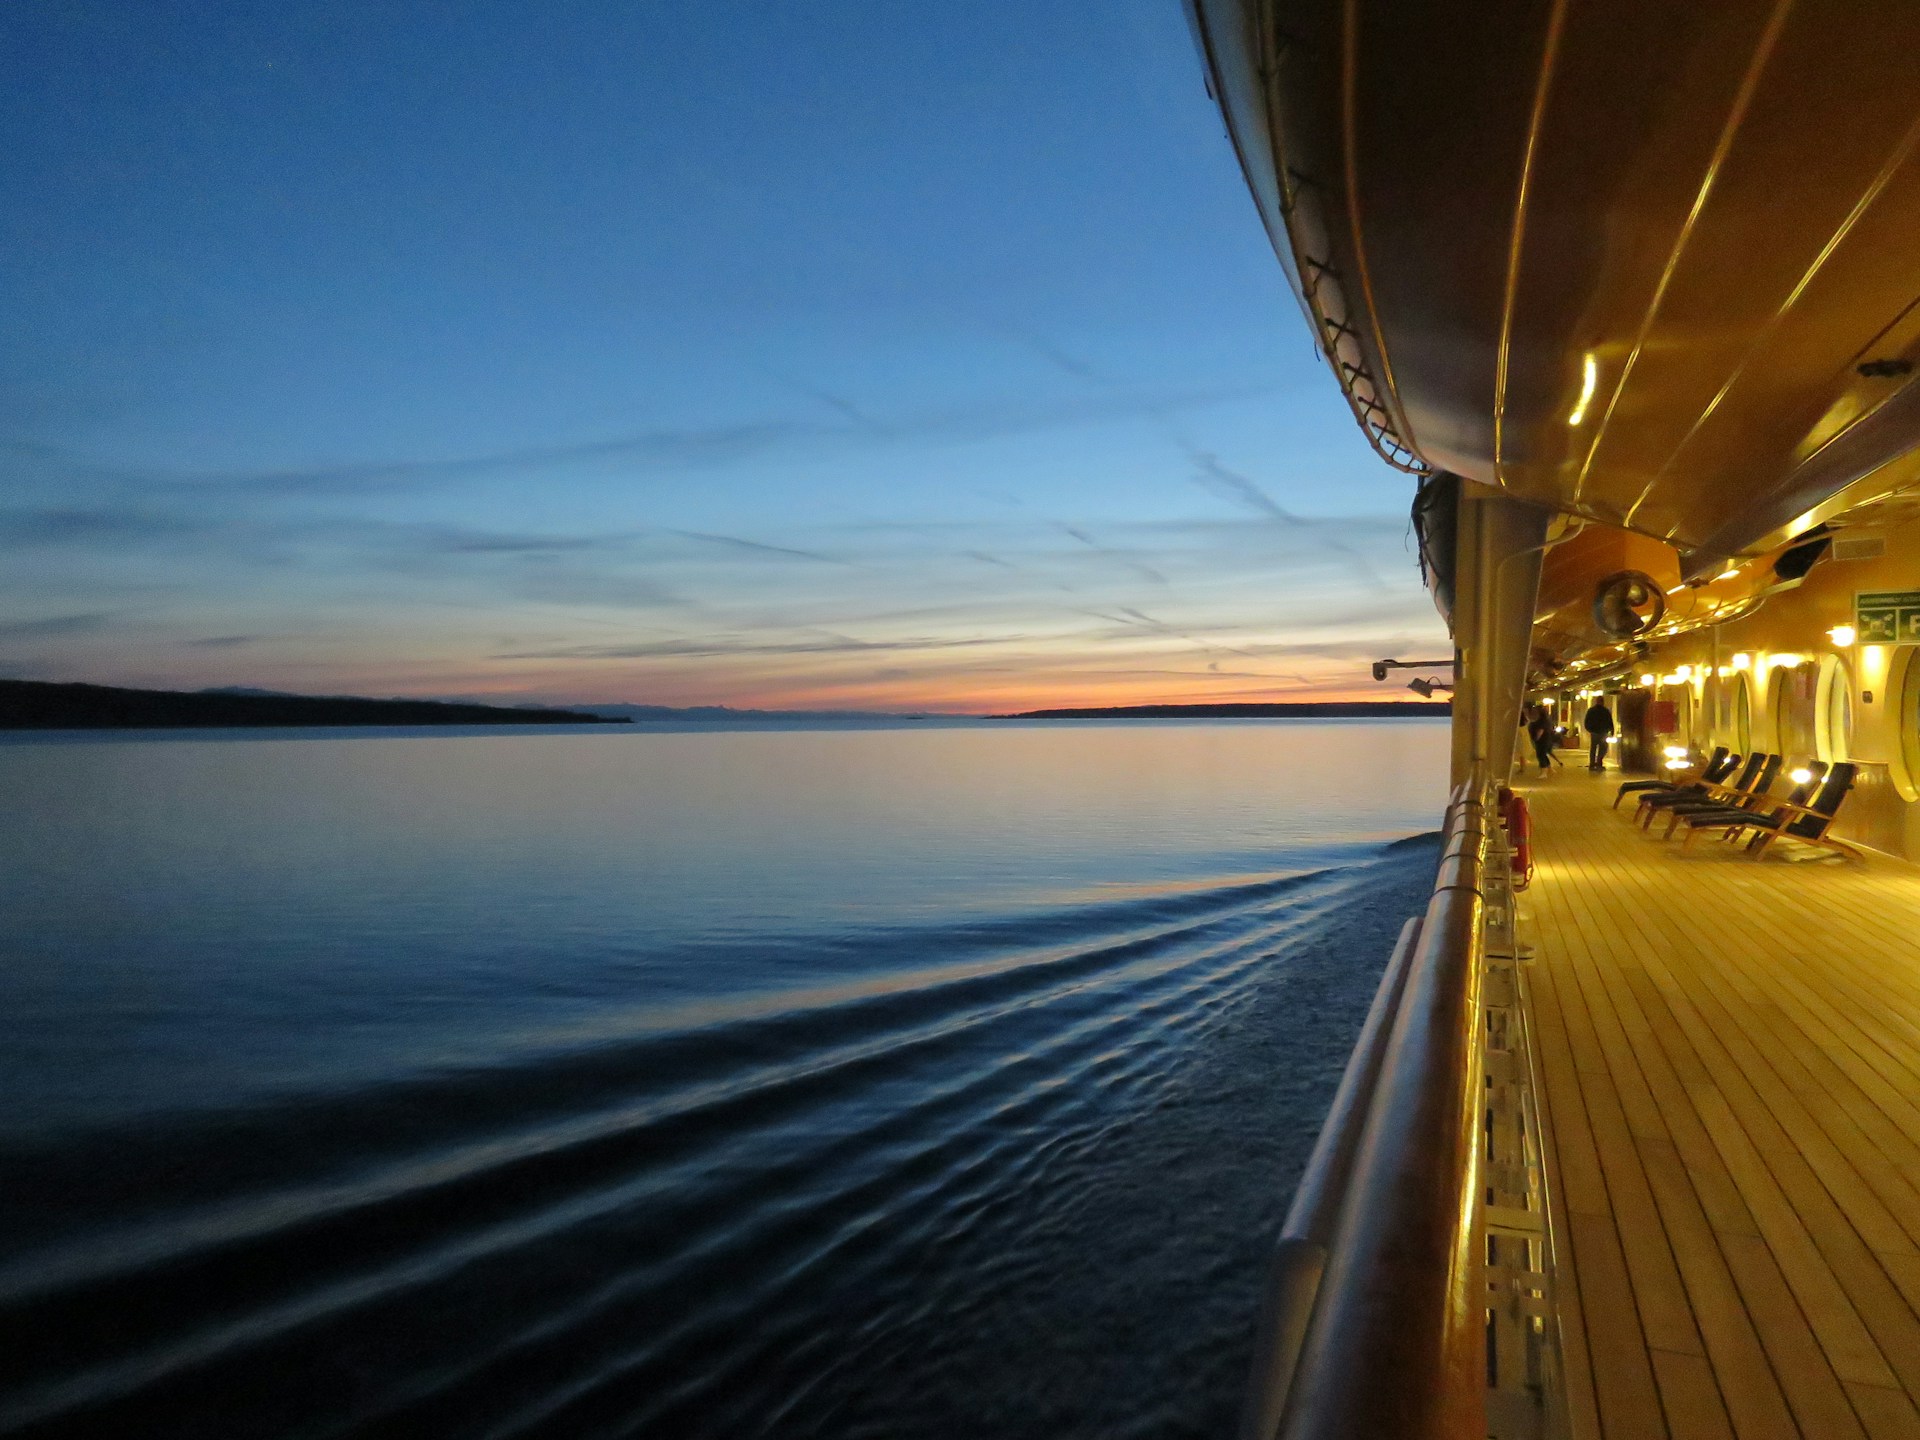 The deck of a cruise ship at dusk